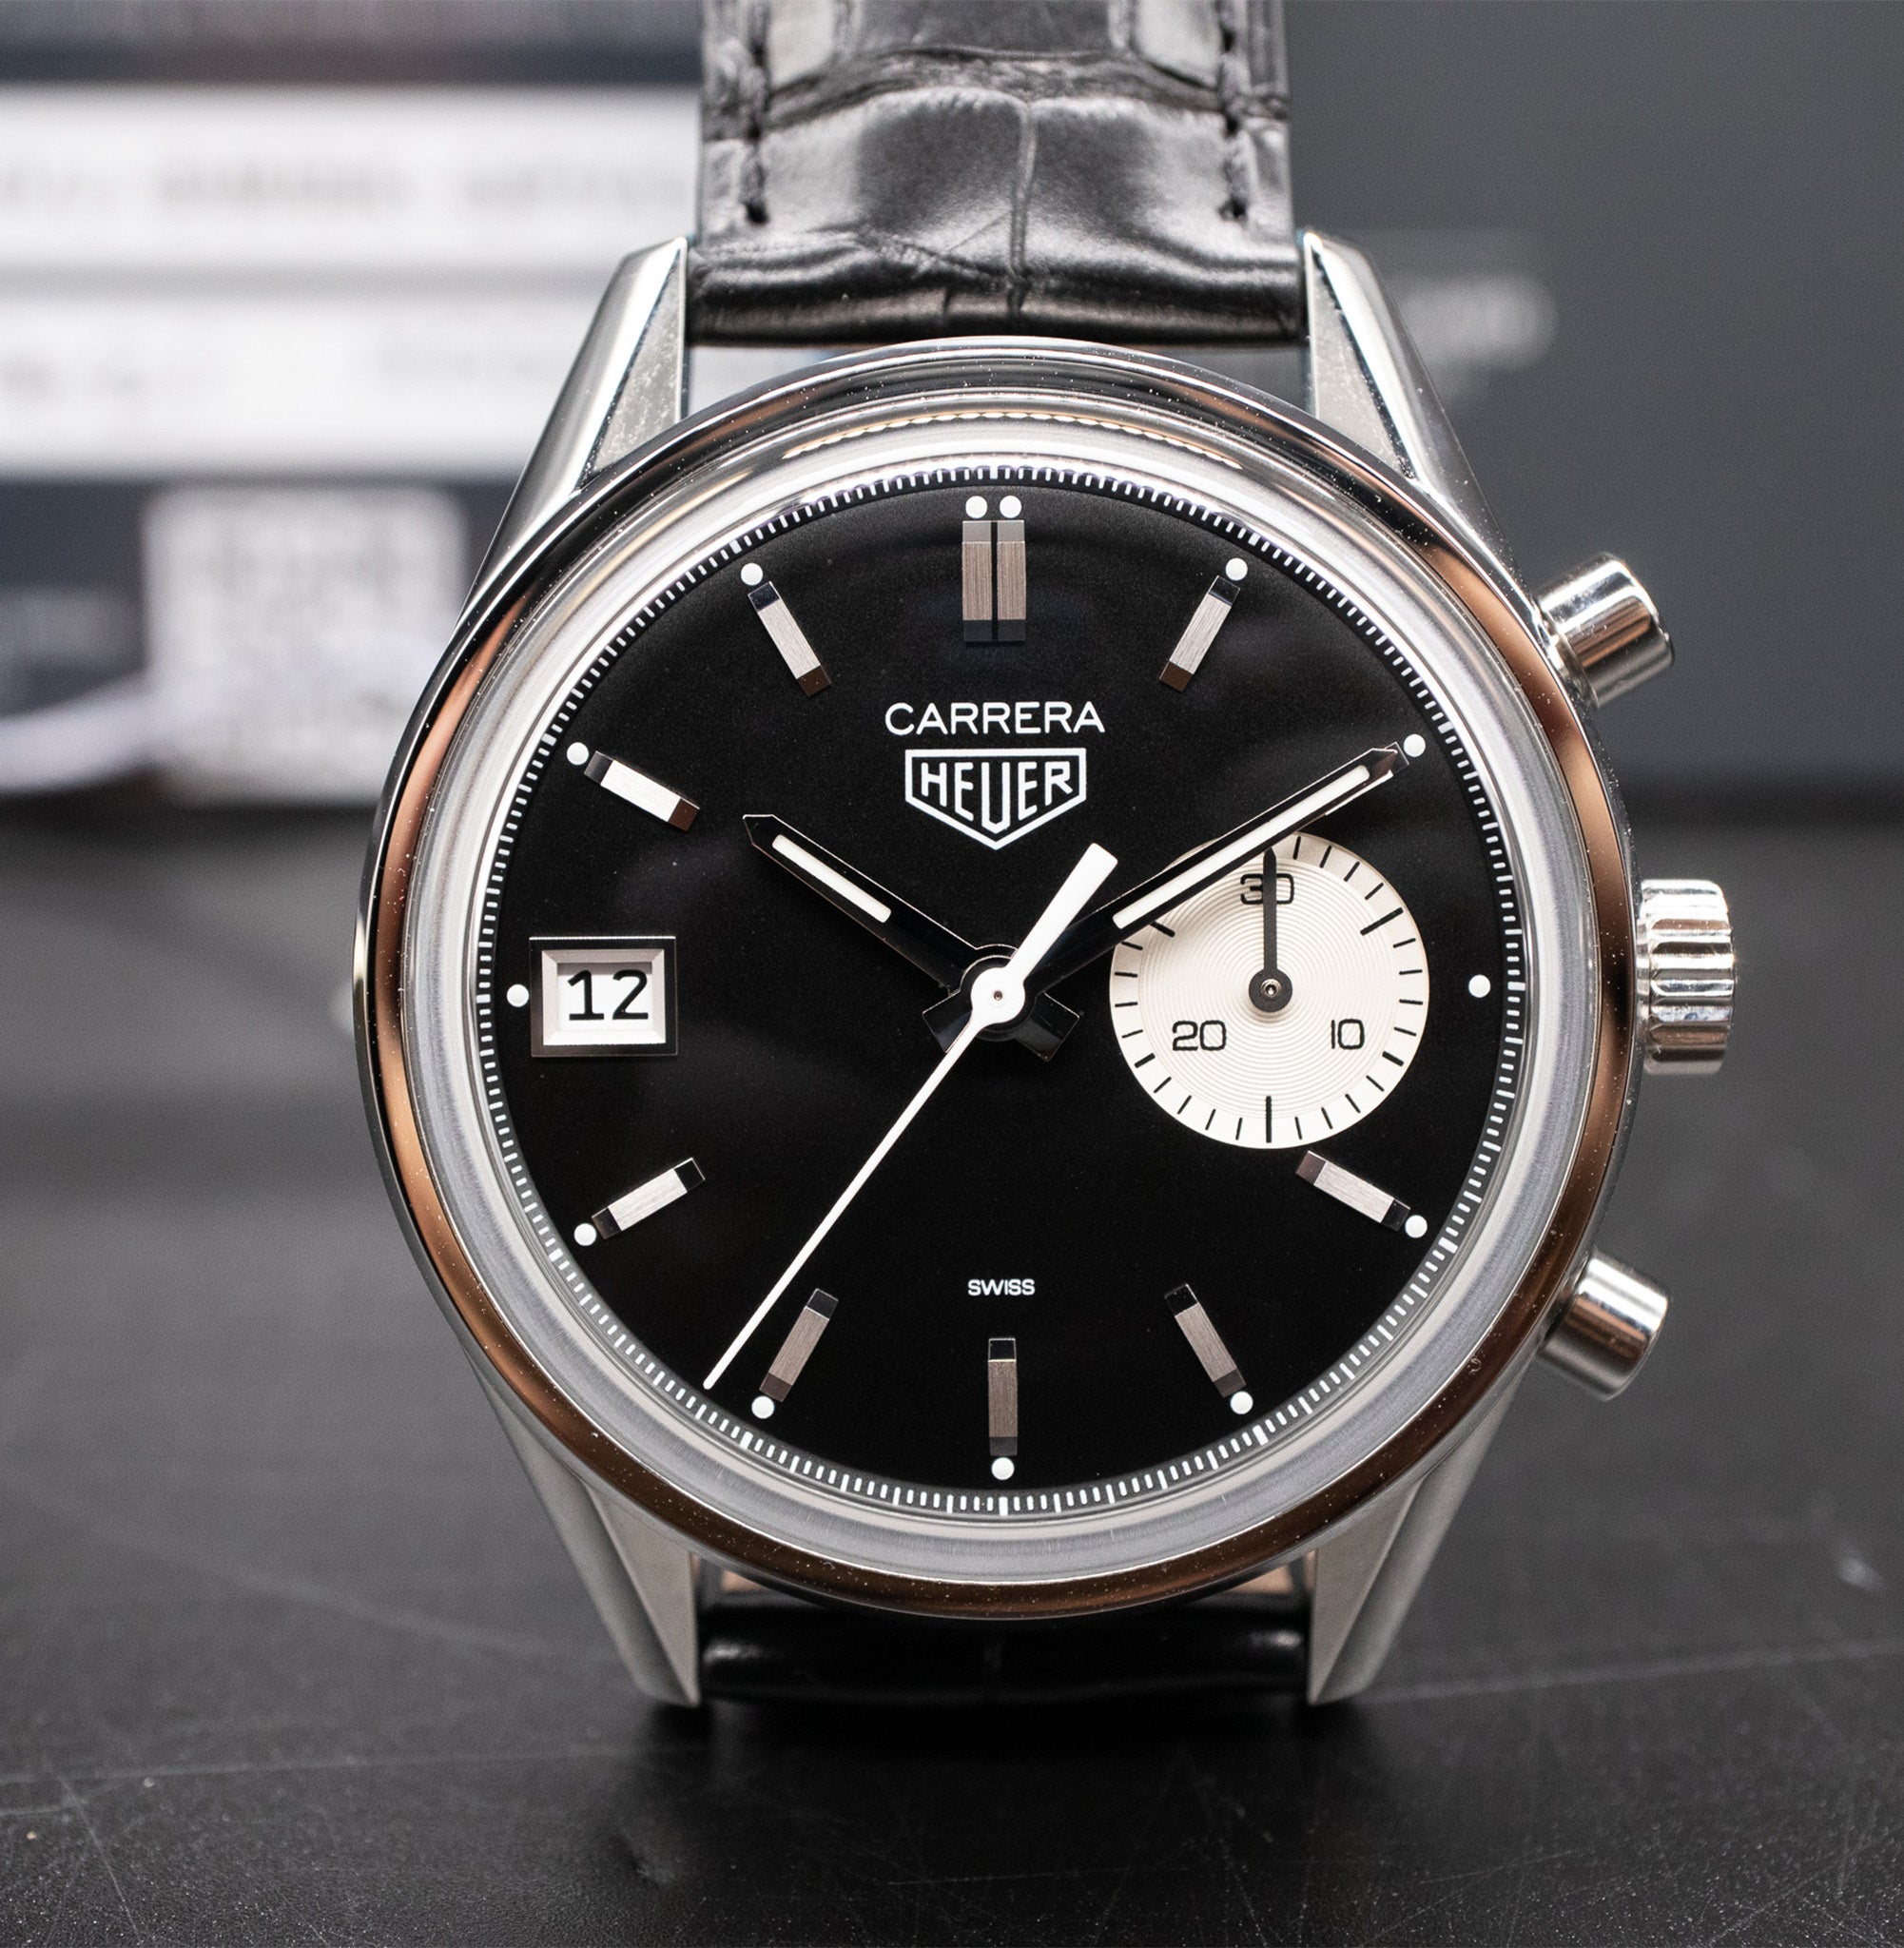 The Tag Heuer Carrera Dato Limited Edition for HODINKEE